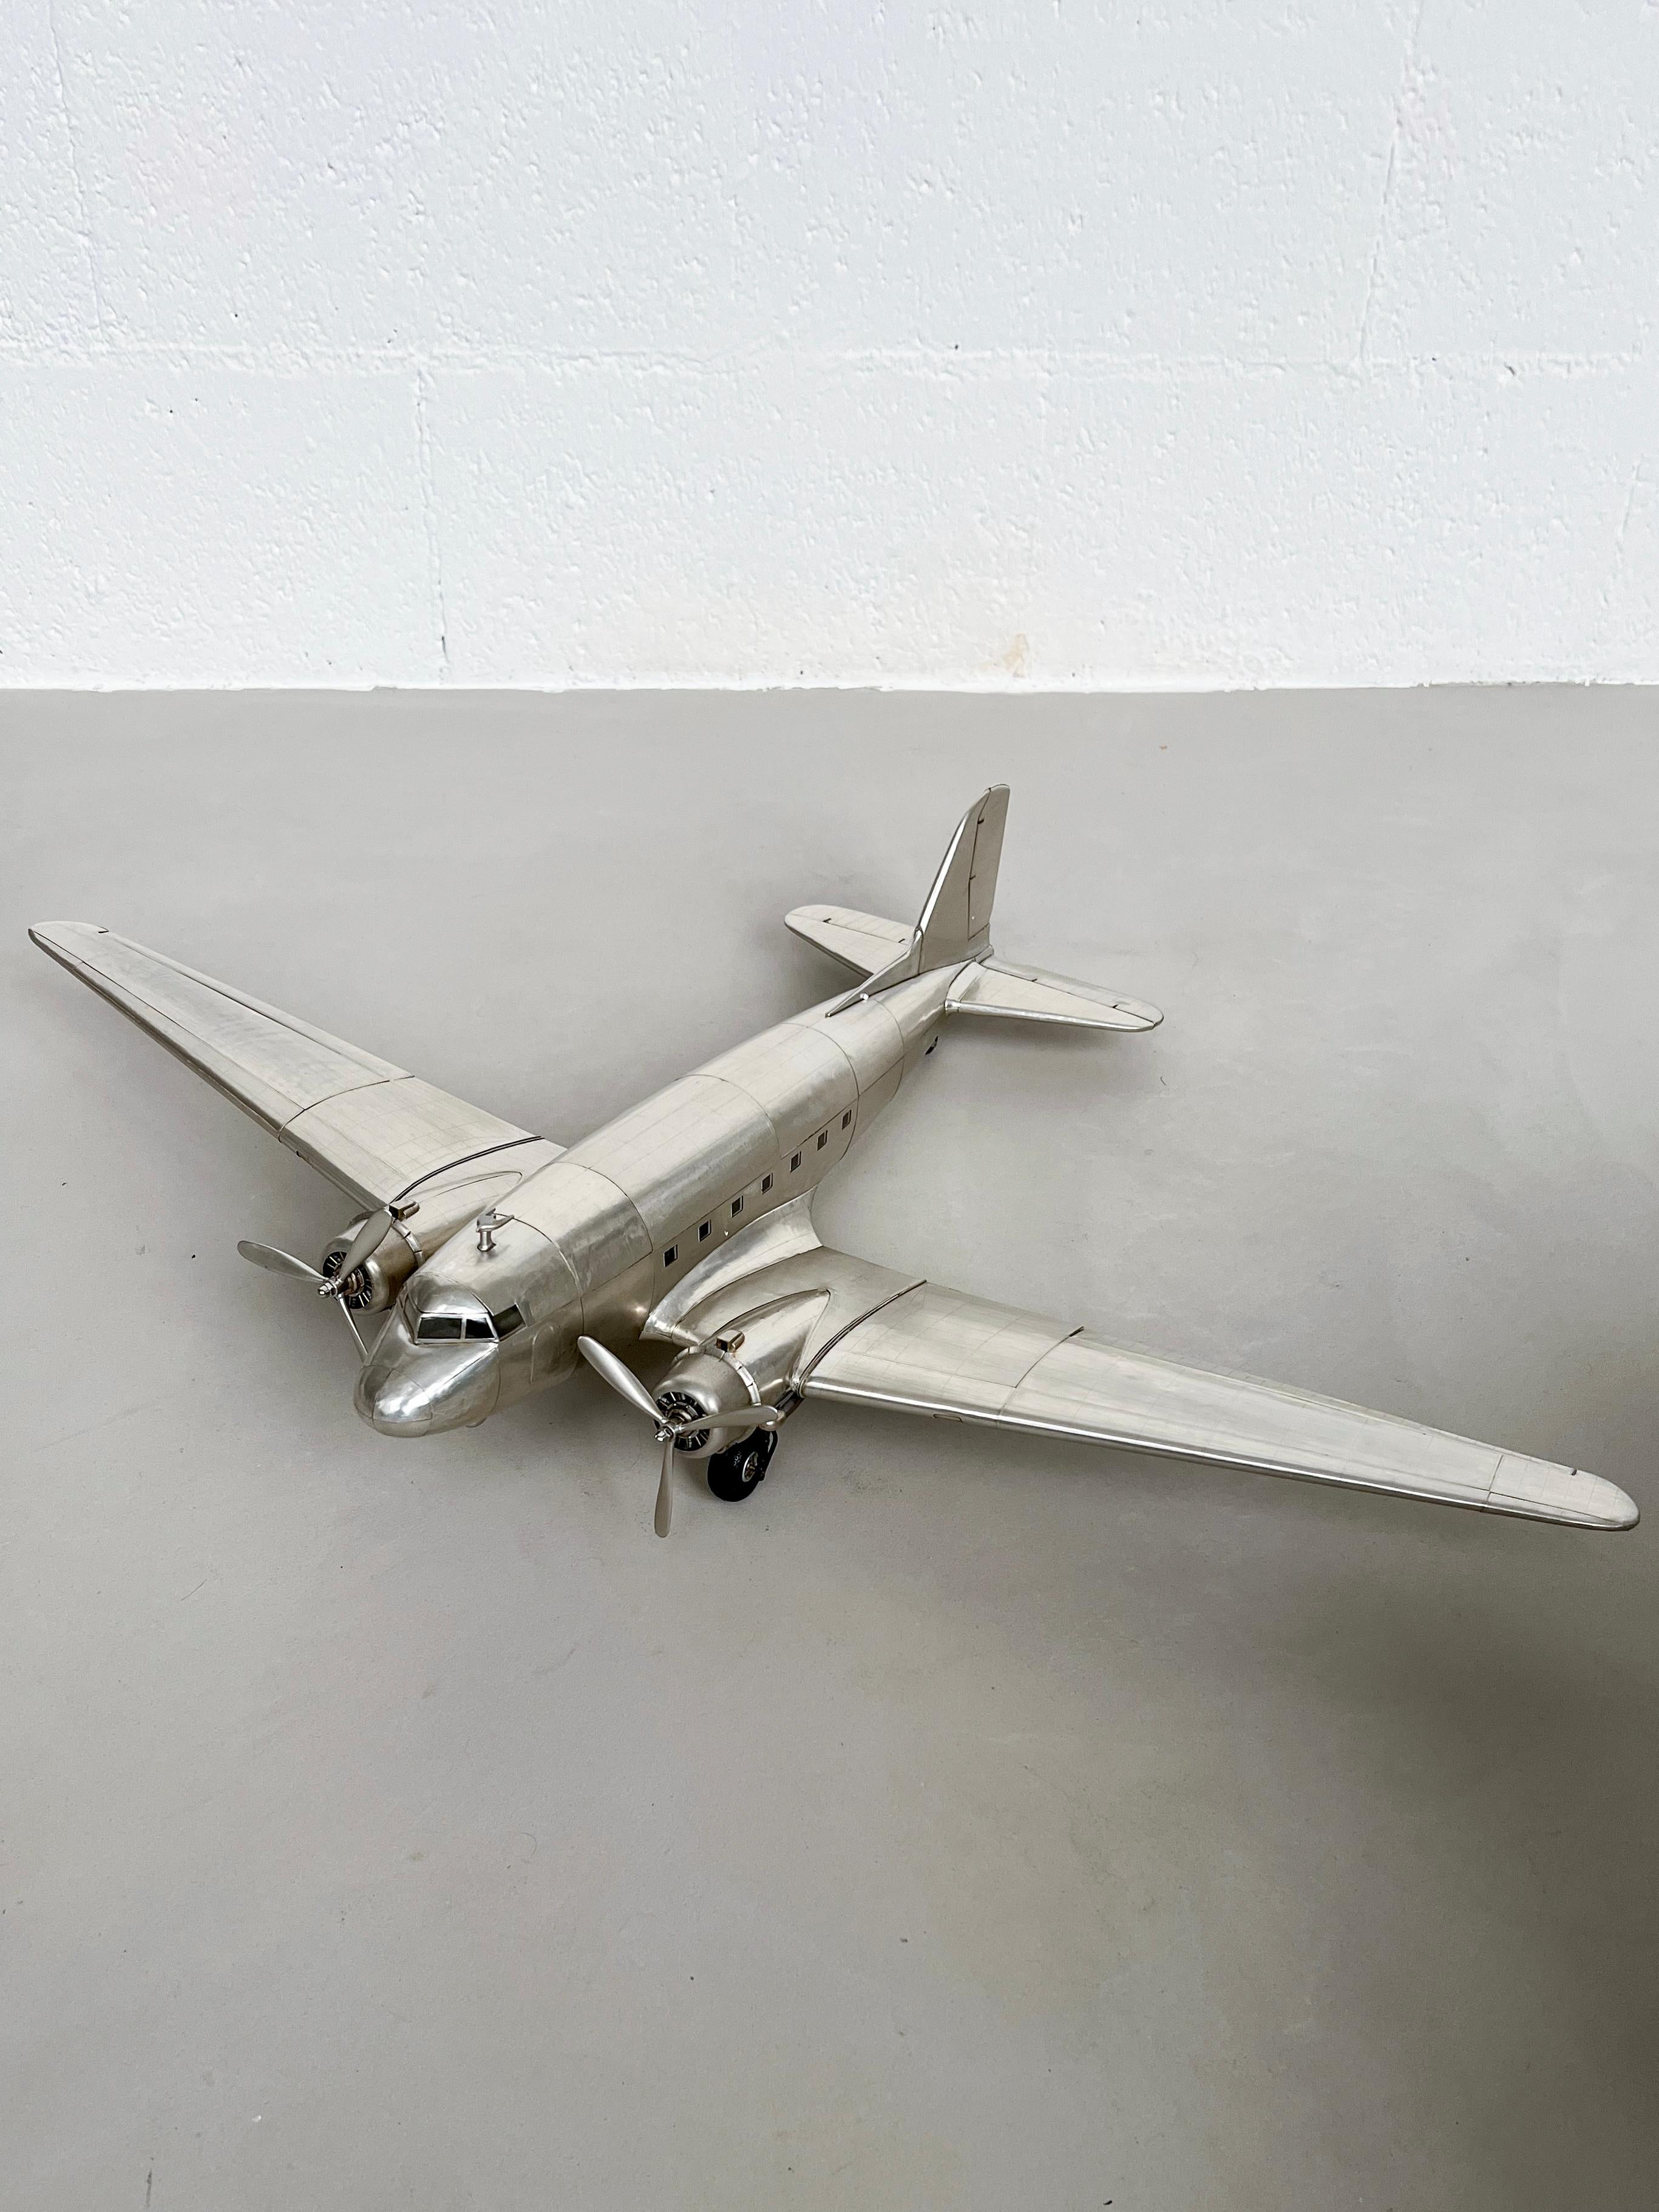 Decorate your living room, bedroom or mancave in style with this huge model of the Douglas DC-3 - the most iconic aircraft of the Twentieth century, the model that laid the bases for commercial aviation and air freight transport as we know them